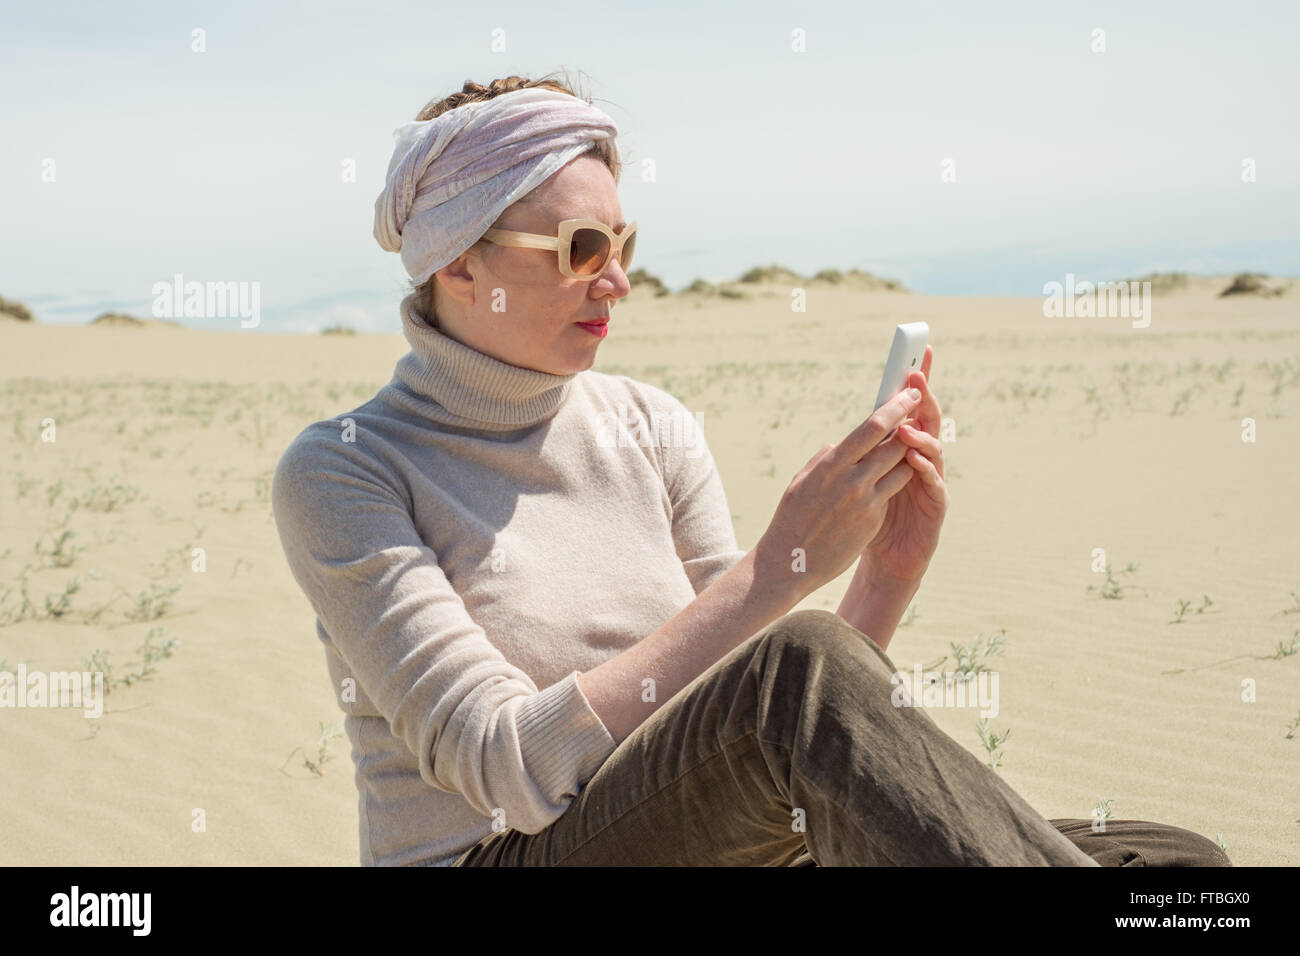 Woman looking at a smartphone in the desert Stock Photo